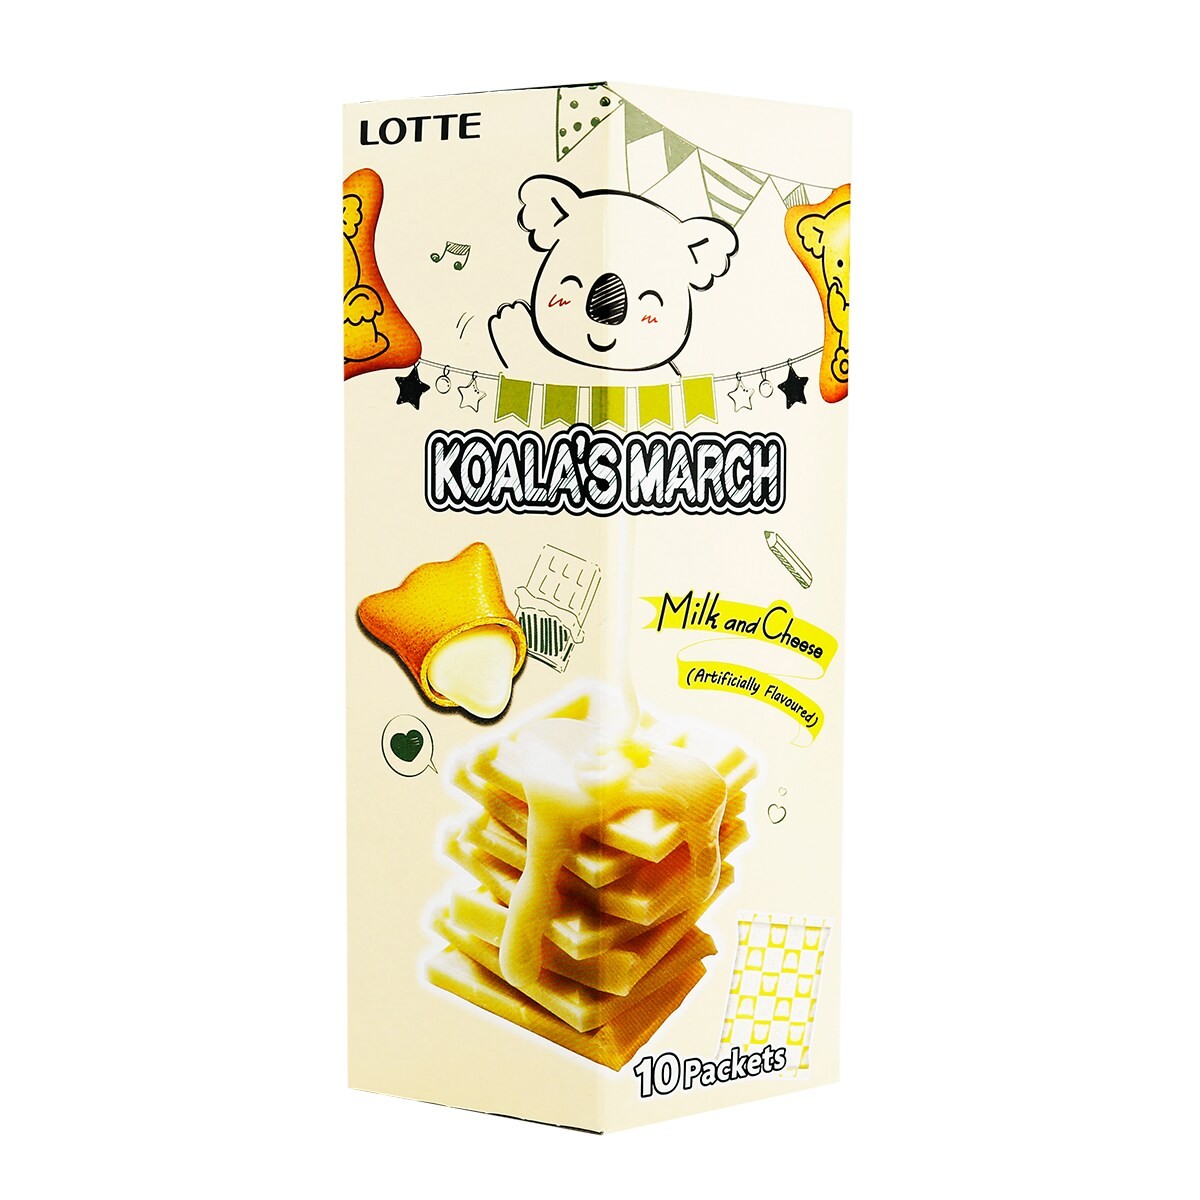 lotte-koalas-march-milk-cream-and-cheese-filled-cookie